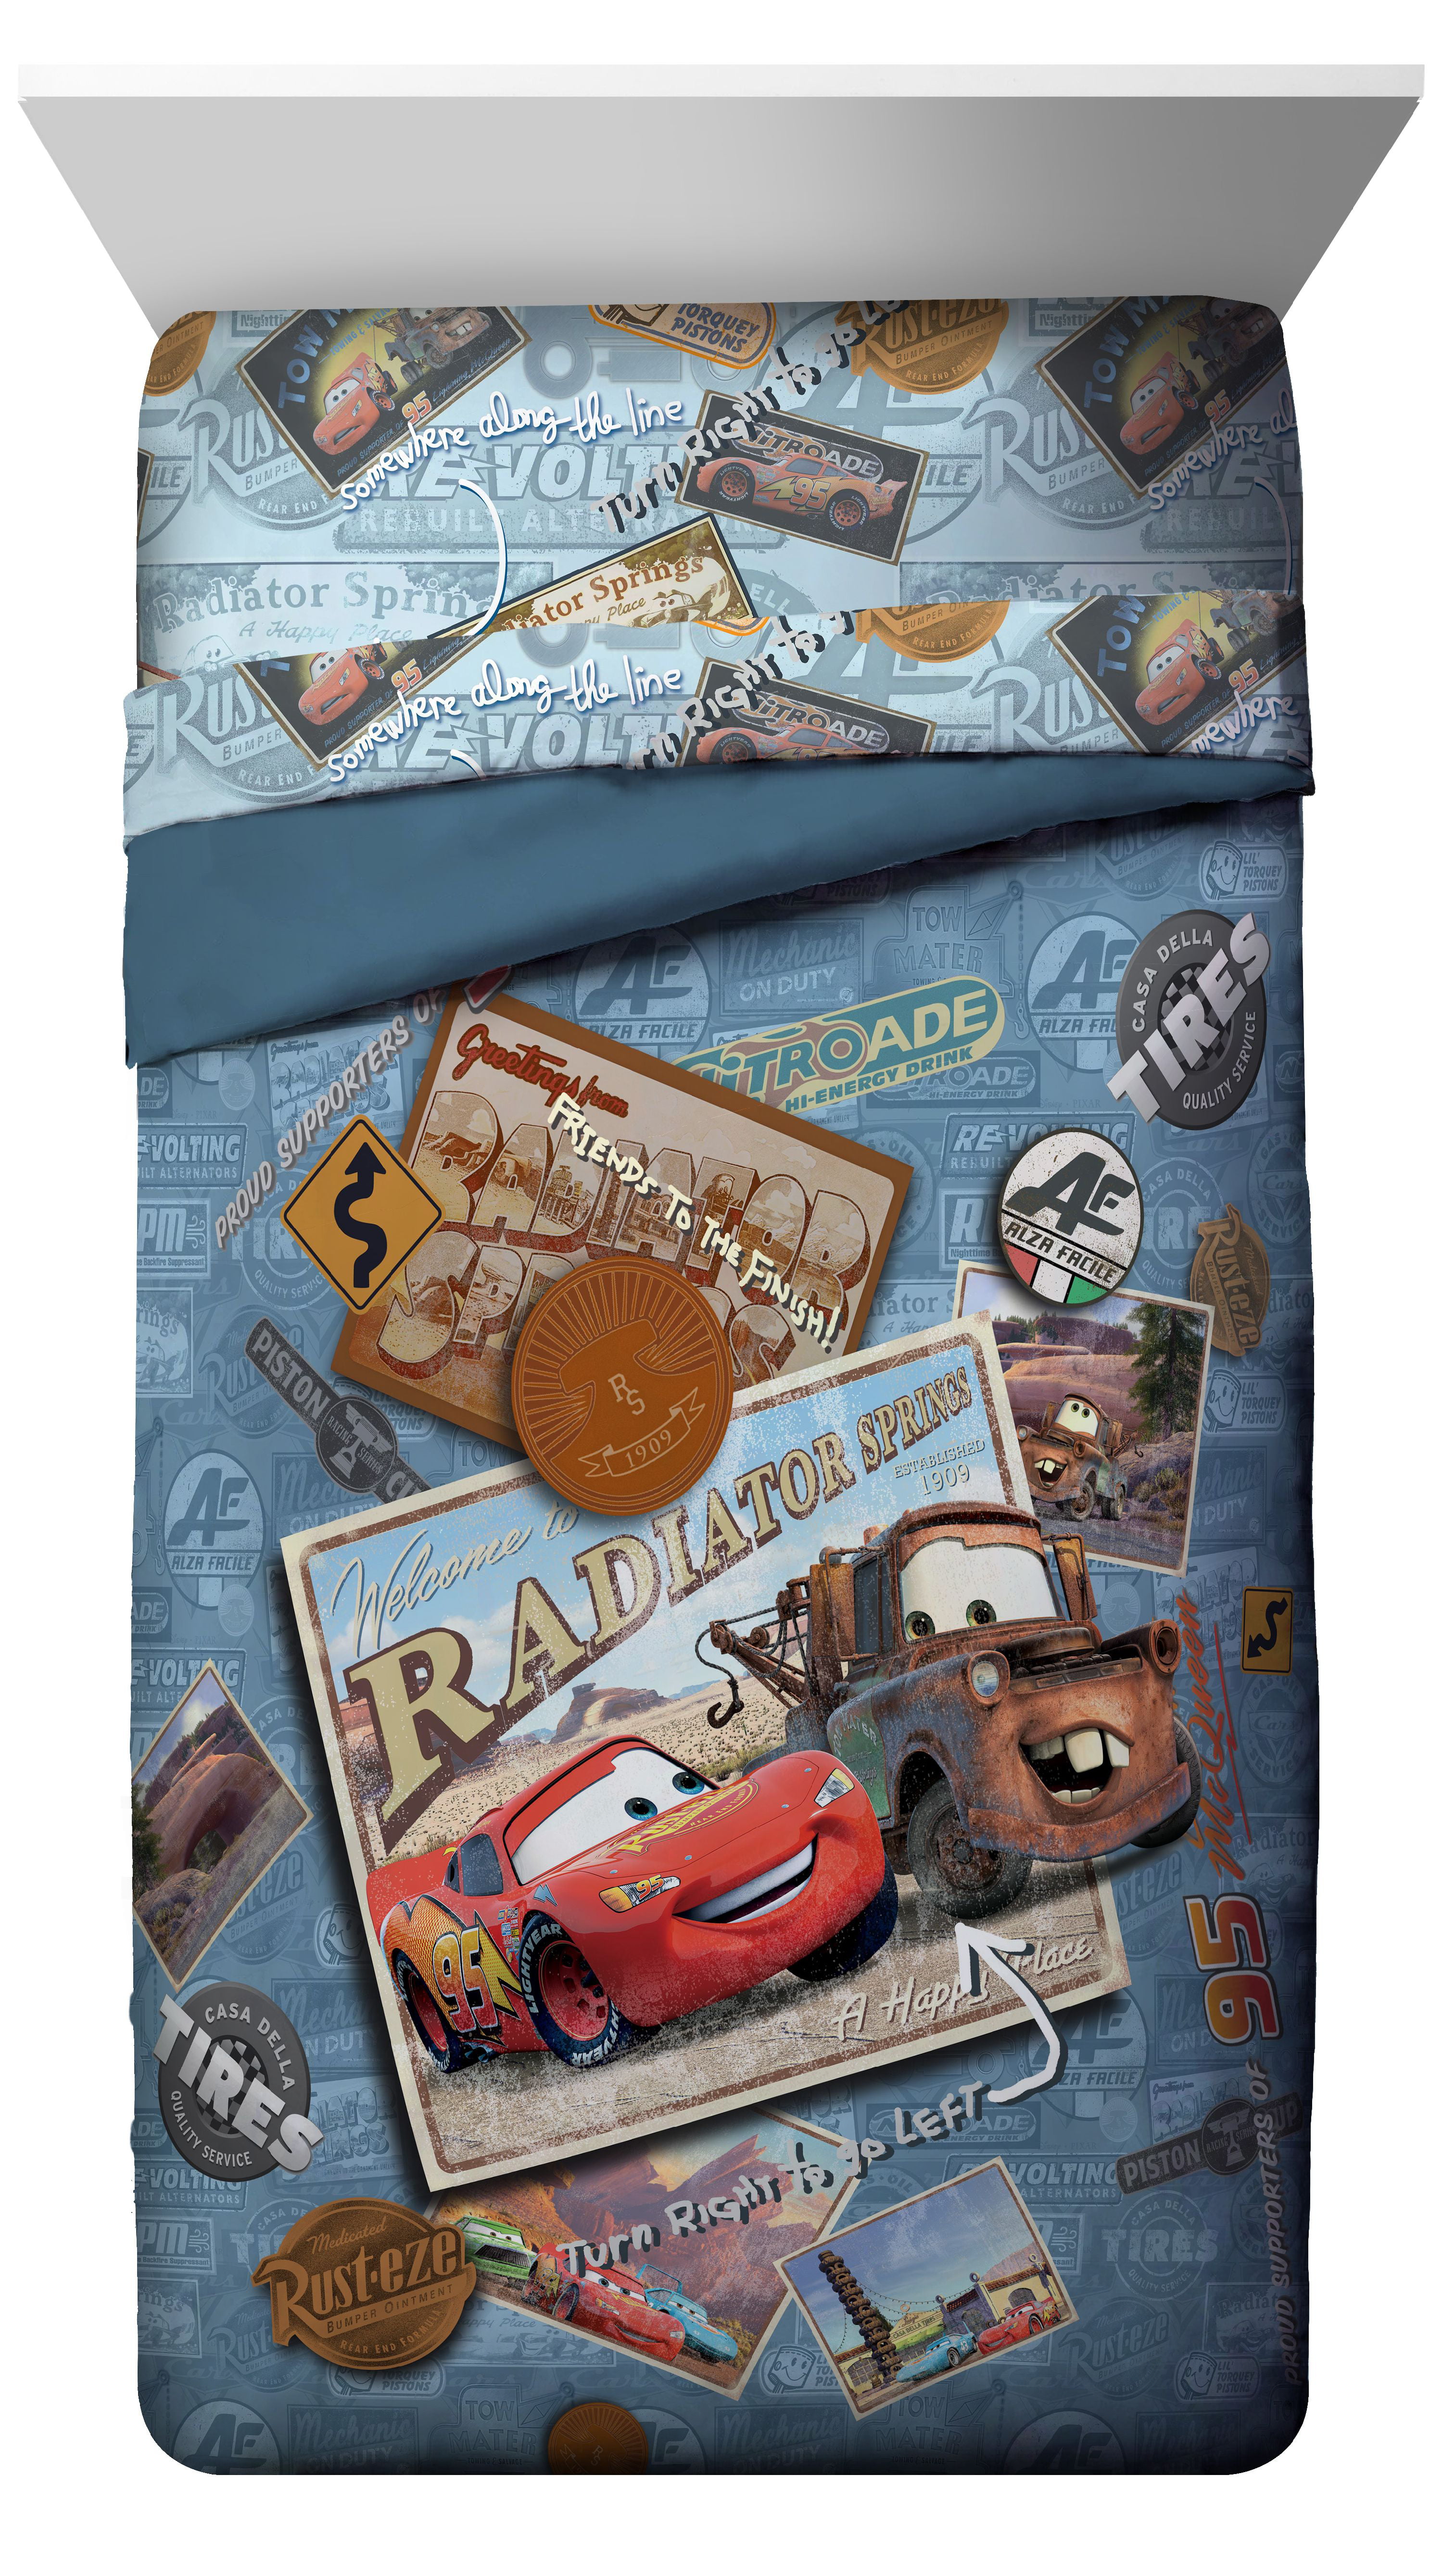 Super Soft Kids Reversible Bedding Features Lightning McQueen and Mater Official Disney Pixar Product Disney Pixar Cars Tune Up Twin/Full Comforter Fade Resistant Polyester Microfiber Fill